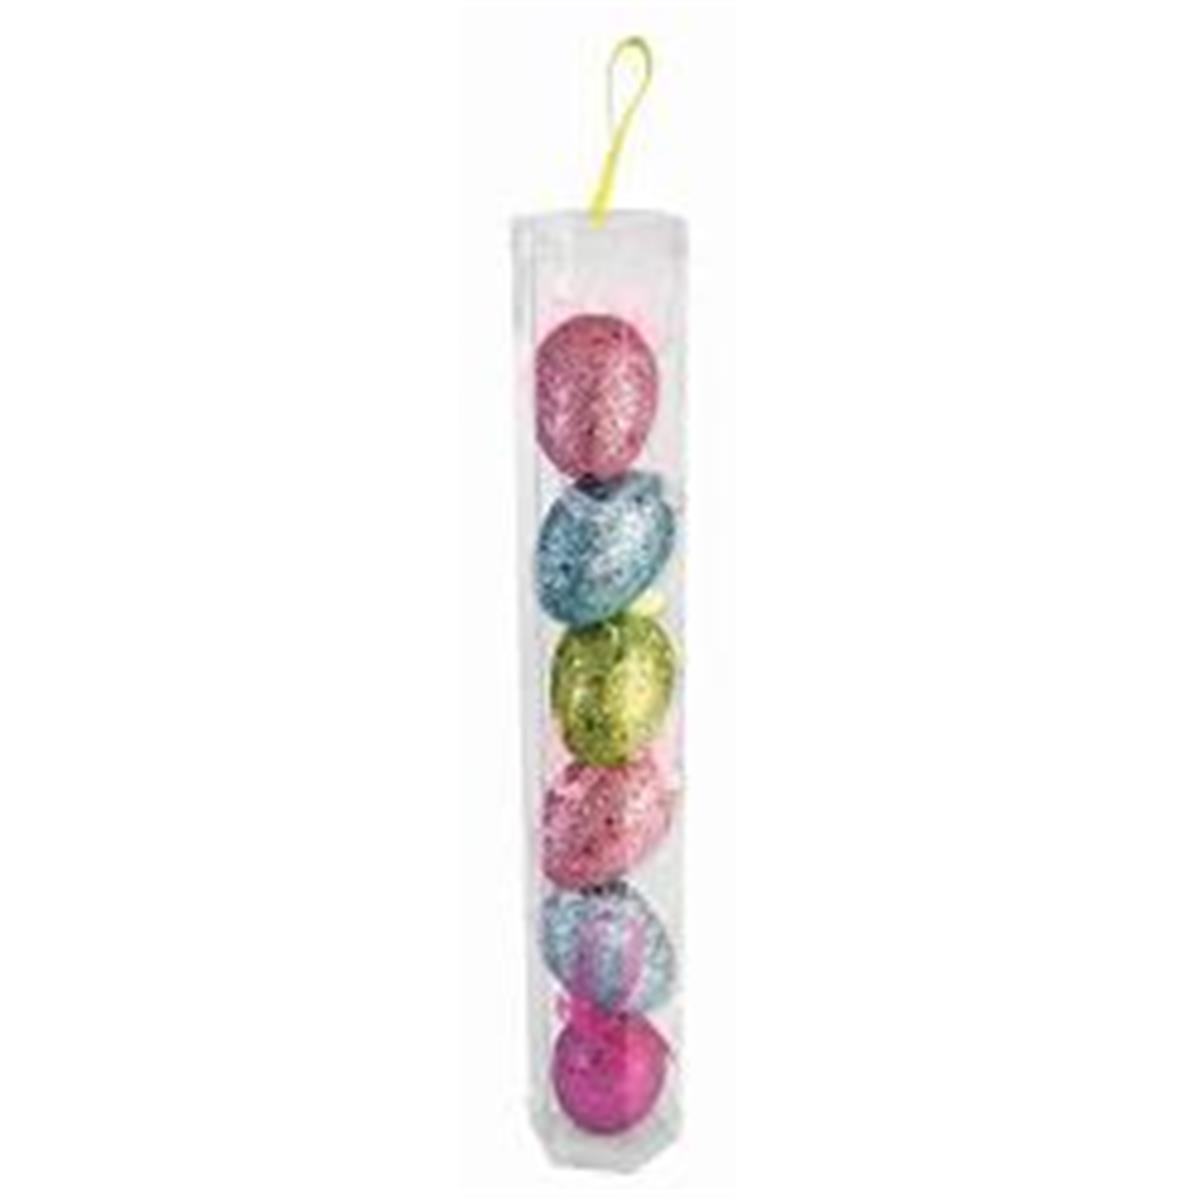 Picture of Forum Novelties 309728 Easter Decorative Glitter Eggs - 6 Count